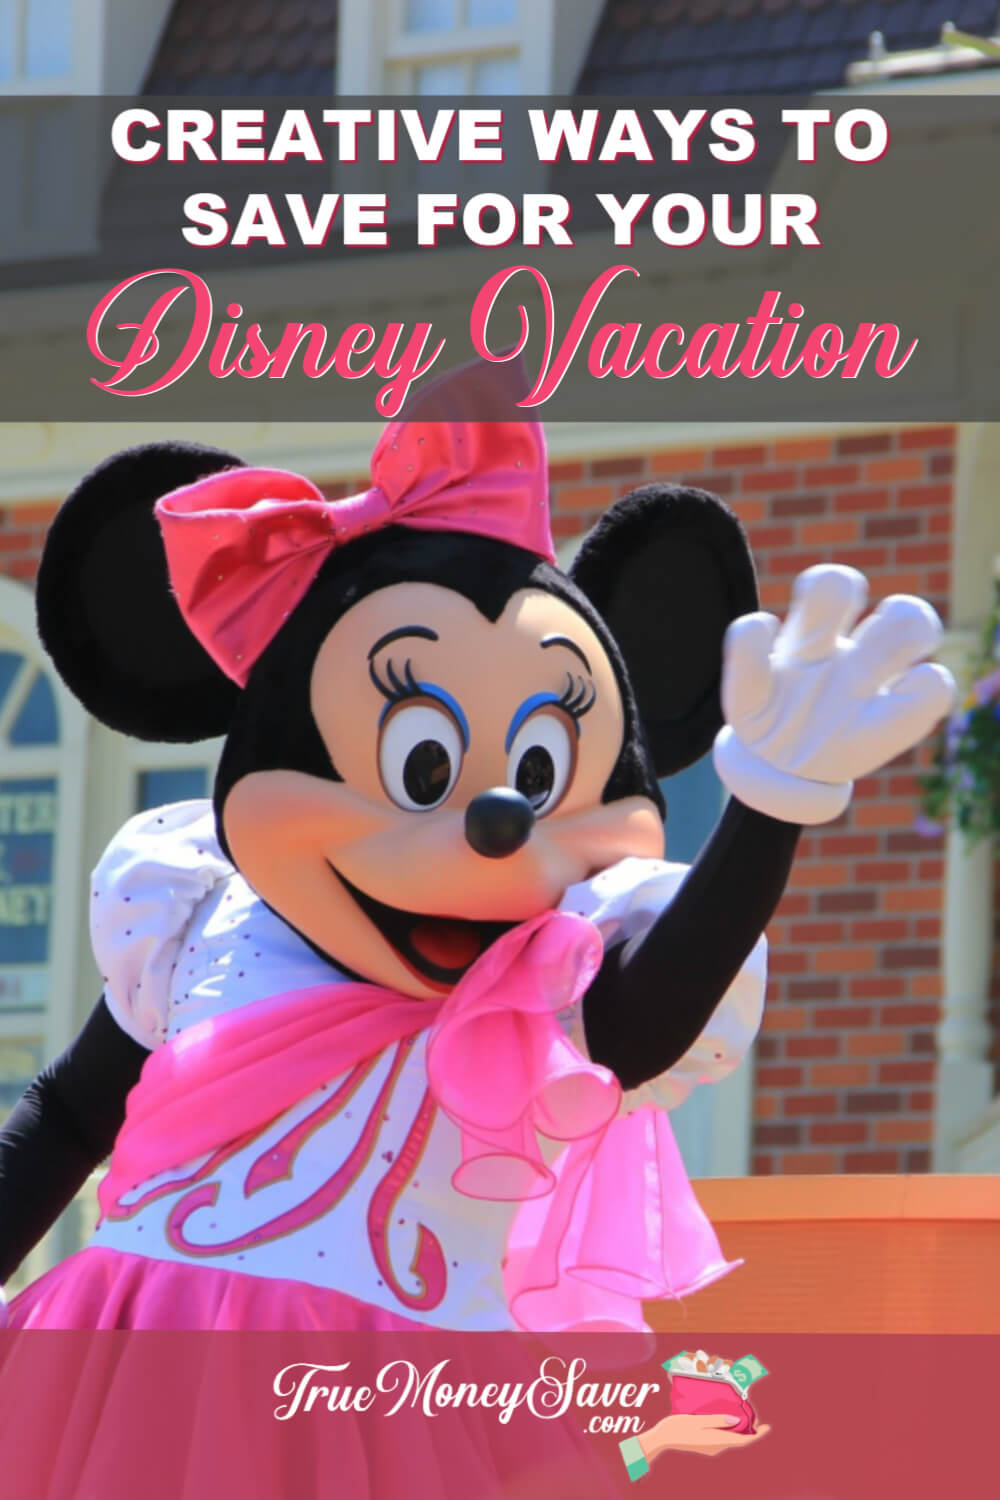 Creative Ways To Add Money To Your Disney Vacation Account